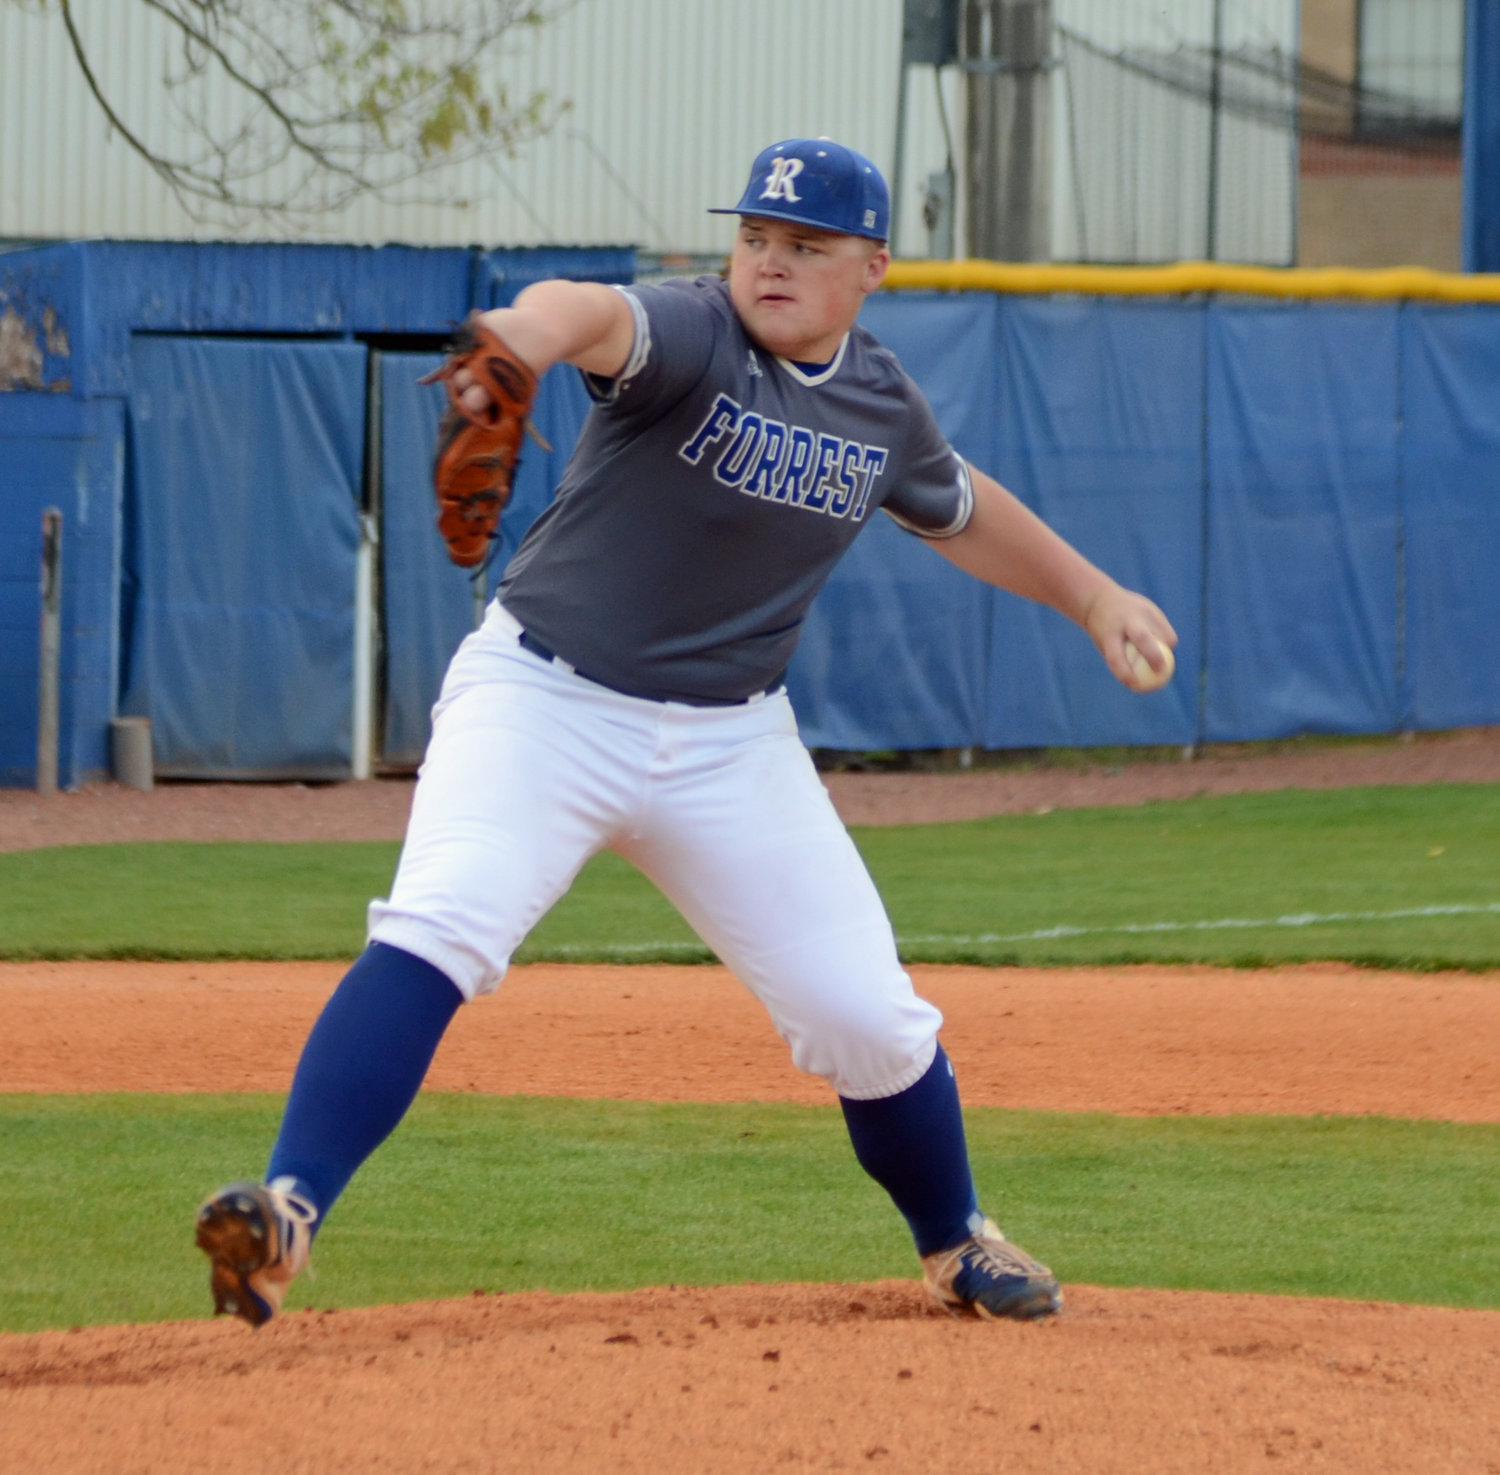 Forrest’s Braden Bowyer pitched a great game Thursday night versus Eagleville, tossing 6.2 tough innings.